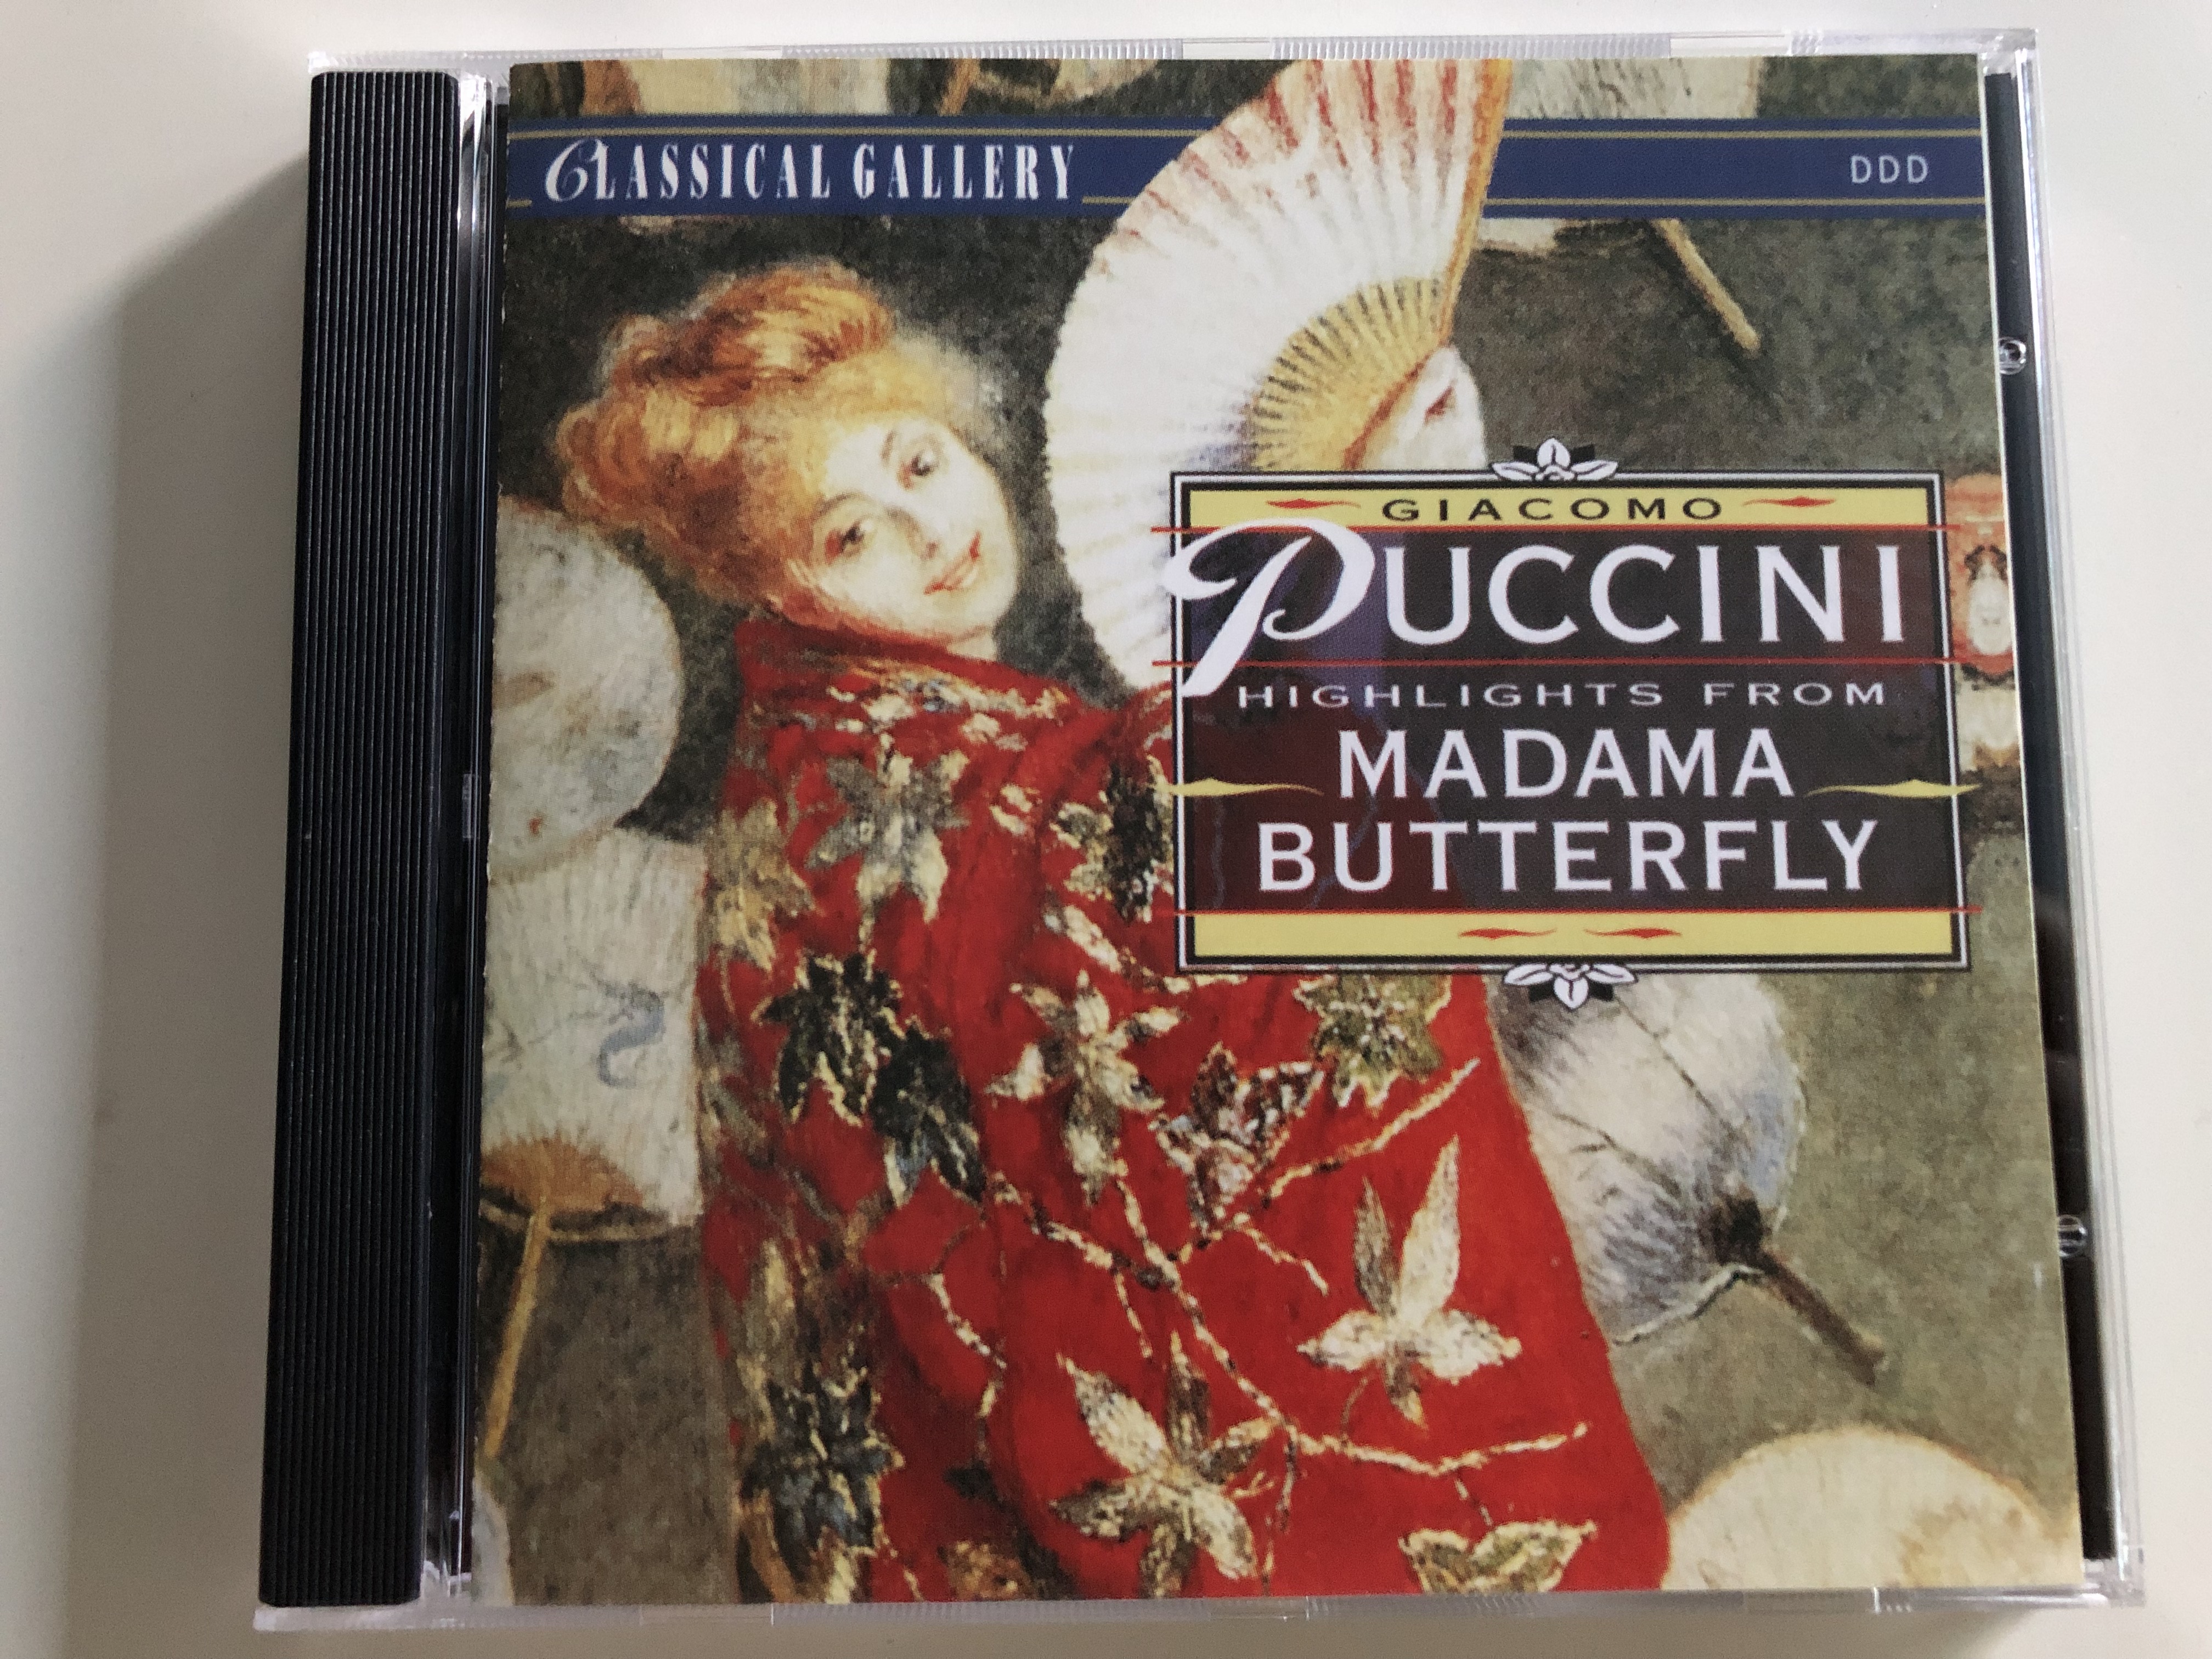 giacomo-puccini-highlights-from-madama-butterfly-classical-gallery-audio-cd-1995-clg-7129-1-.jpg